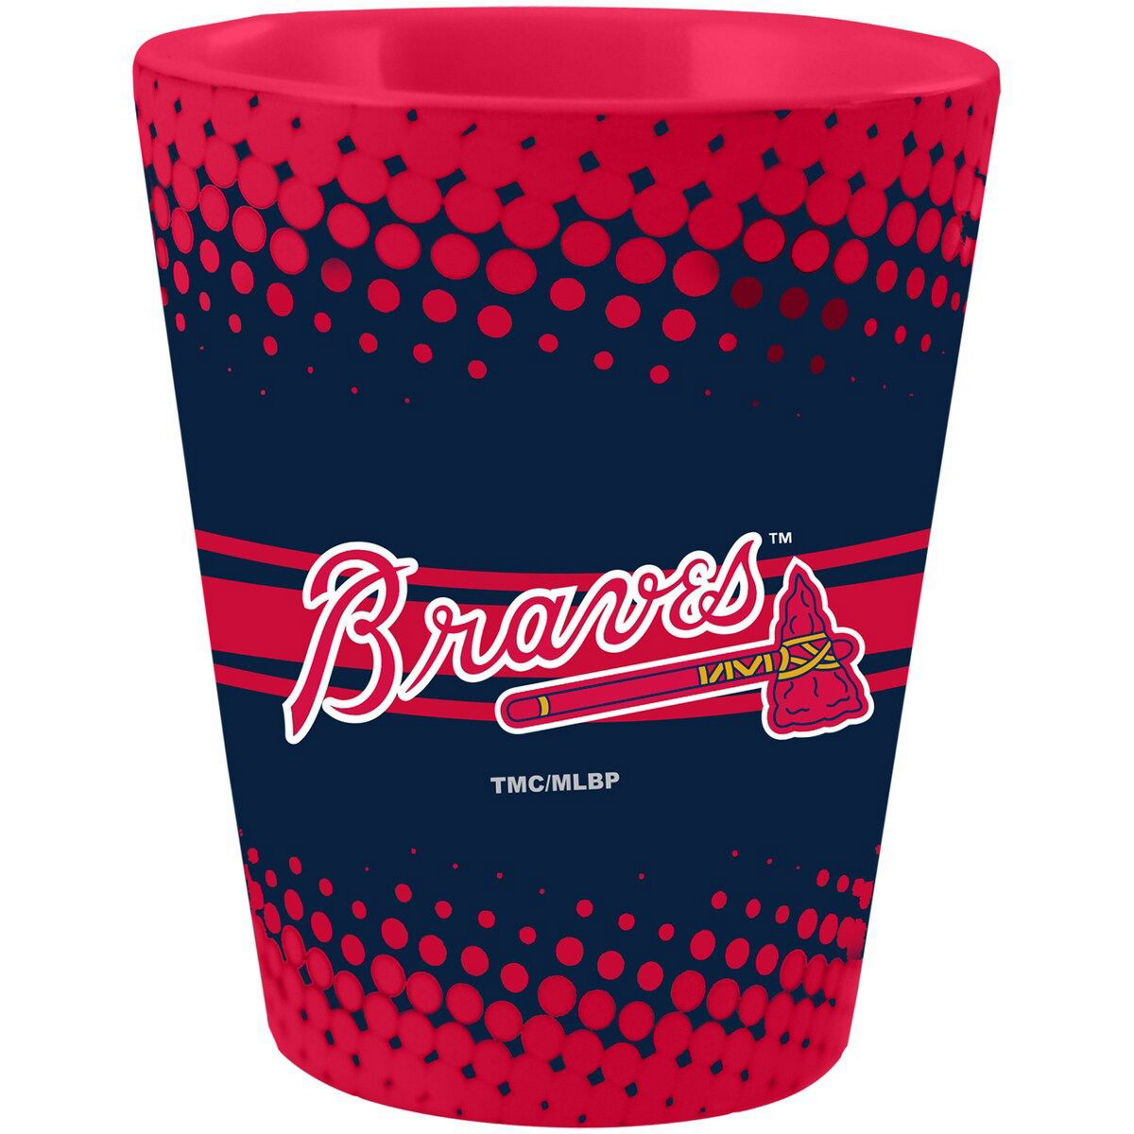 The Memory Company Atlanta Braves Full Wrap Collectible Glass - Image 2 of 3